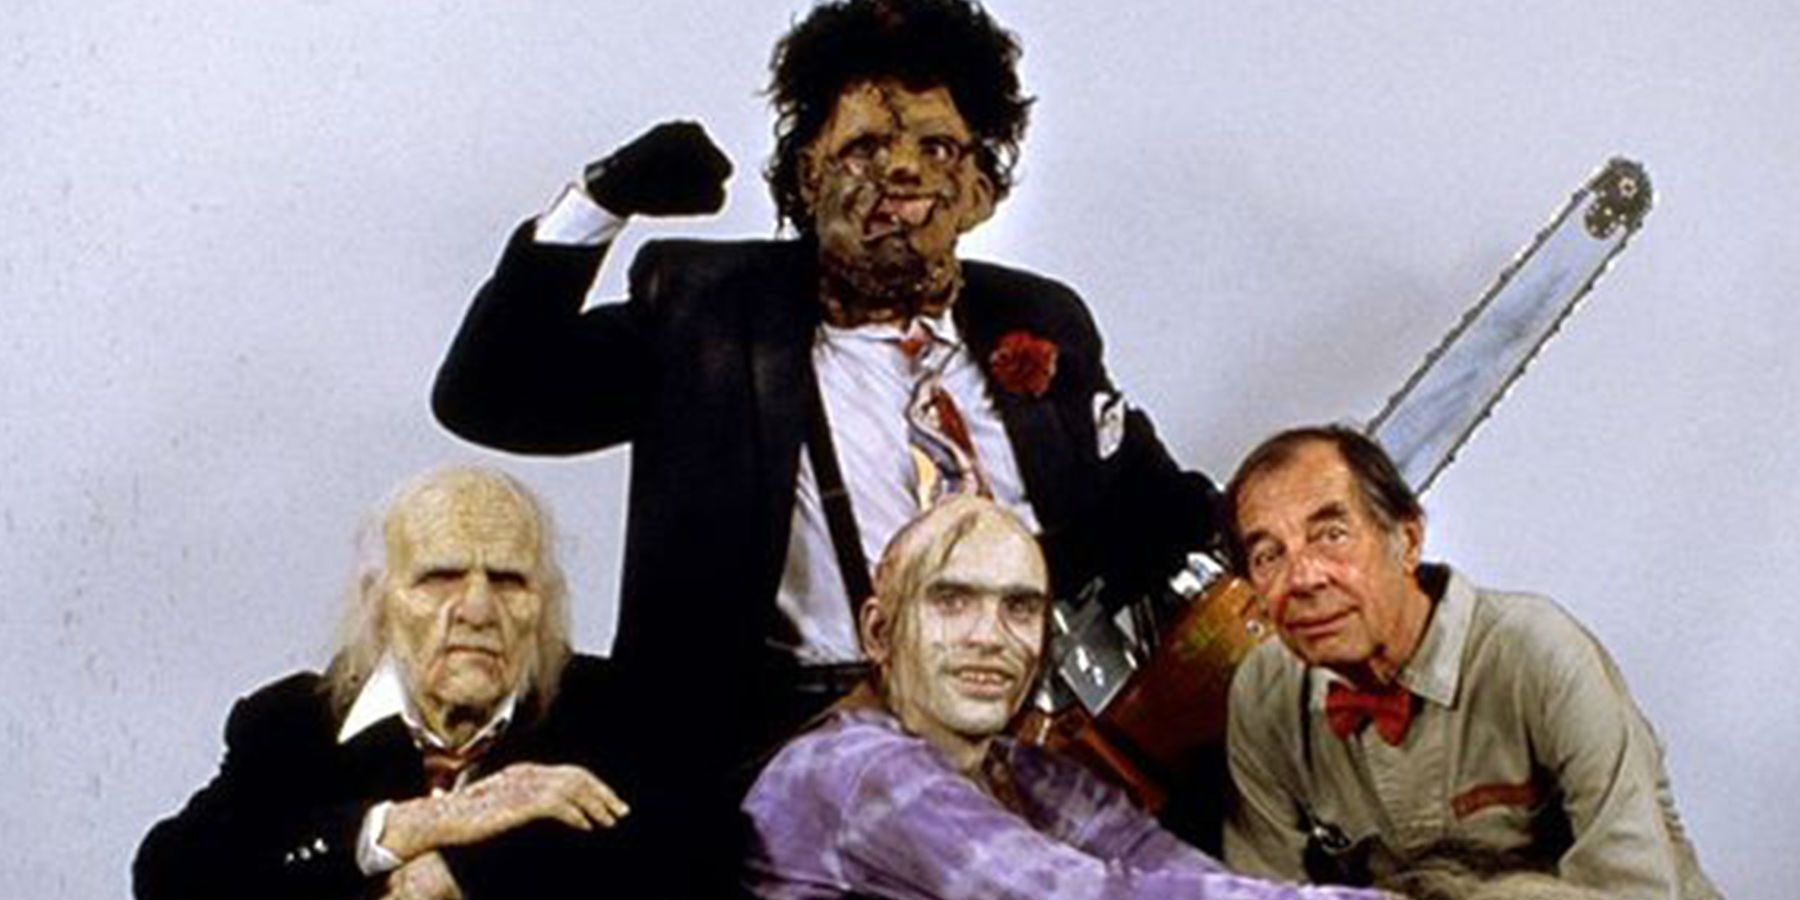 Texas Chainsaw Massacre 2 family parodies the Breakfast Club on the poster